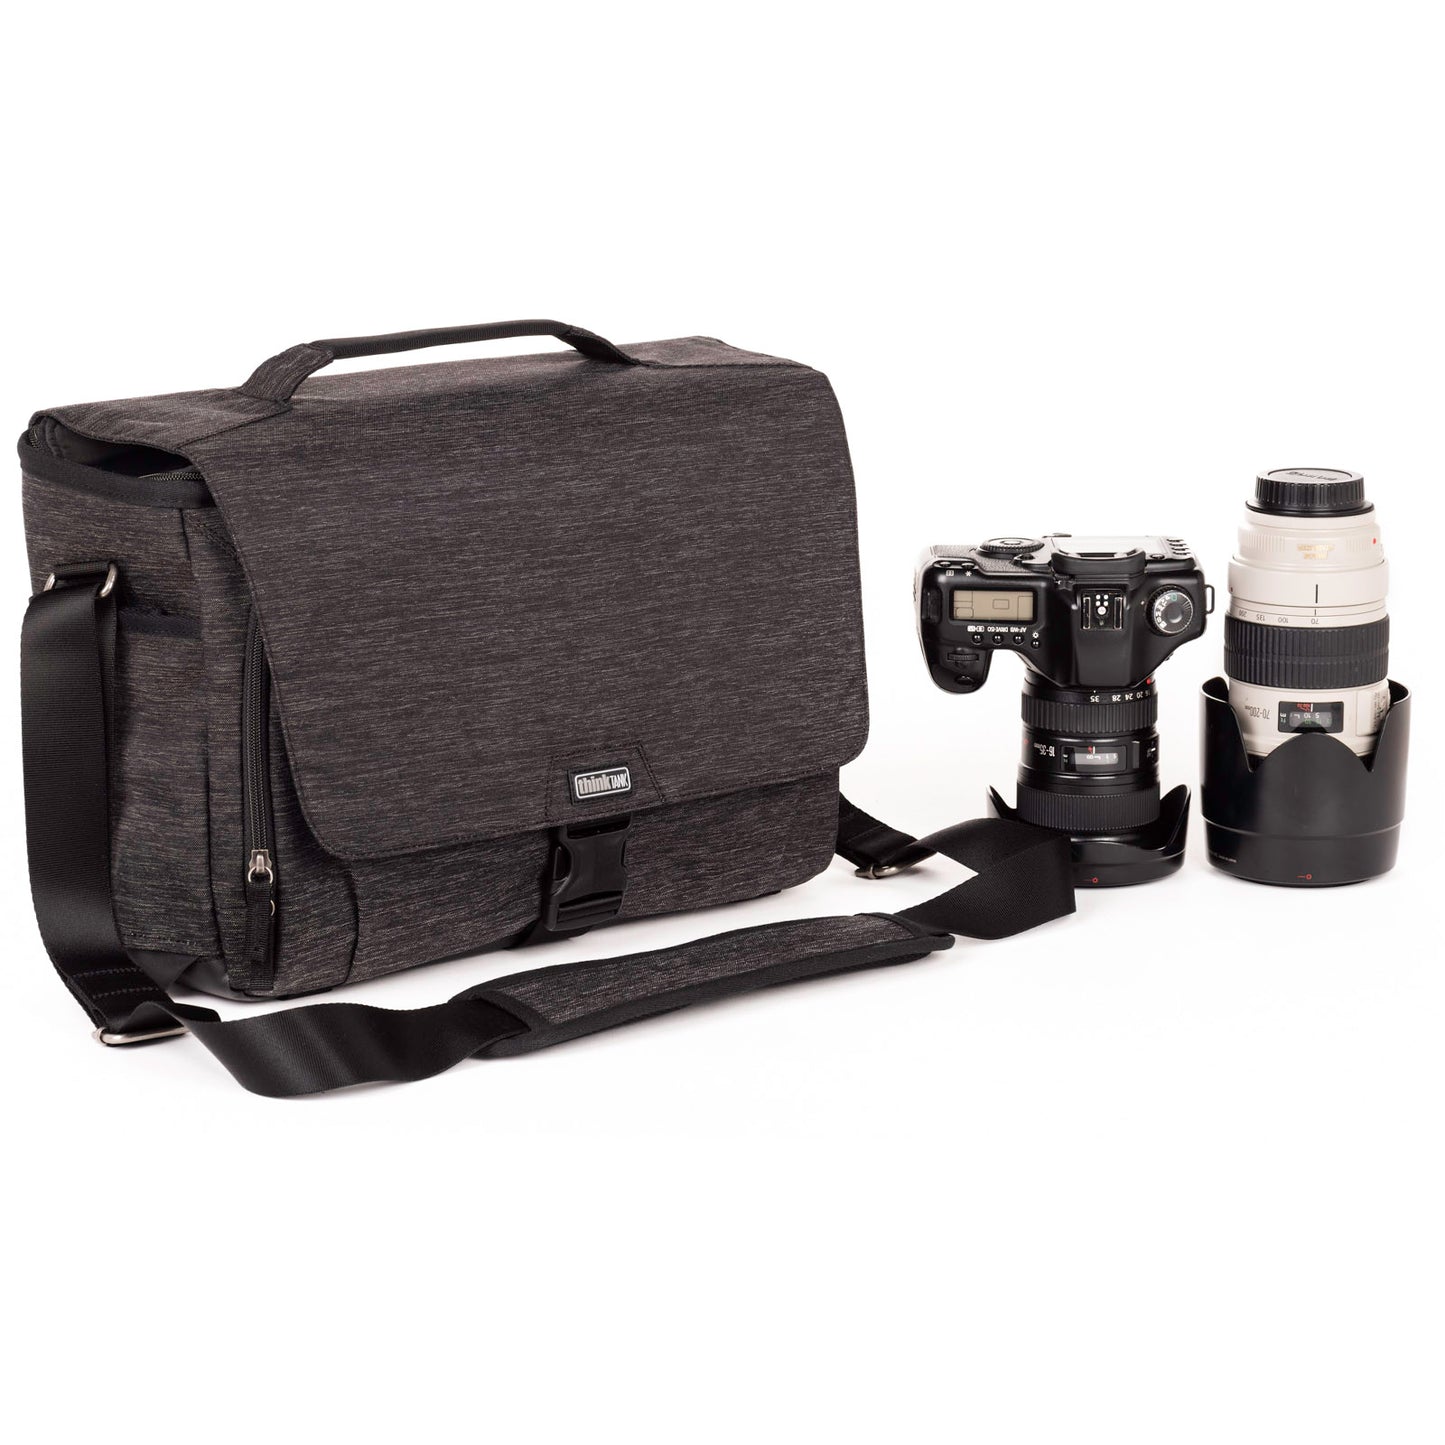 Sized for professional lenses, the Vision Shoulder Bag Series is designed not only for capacity but also for security.